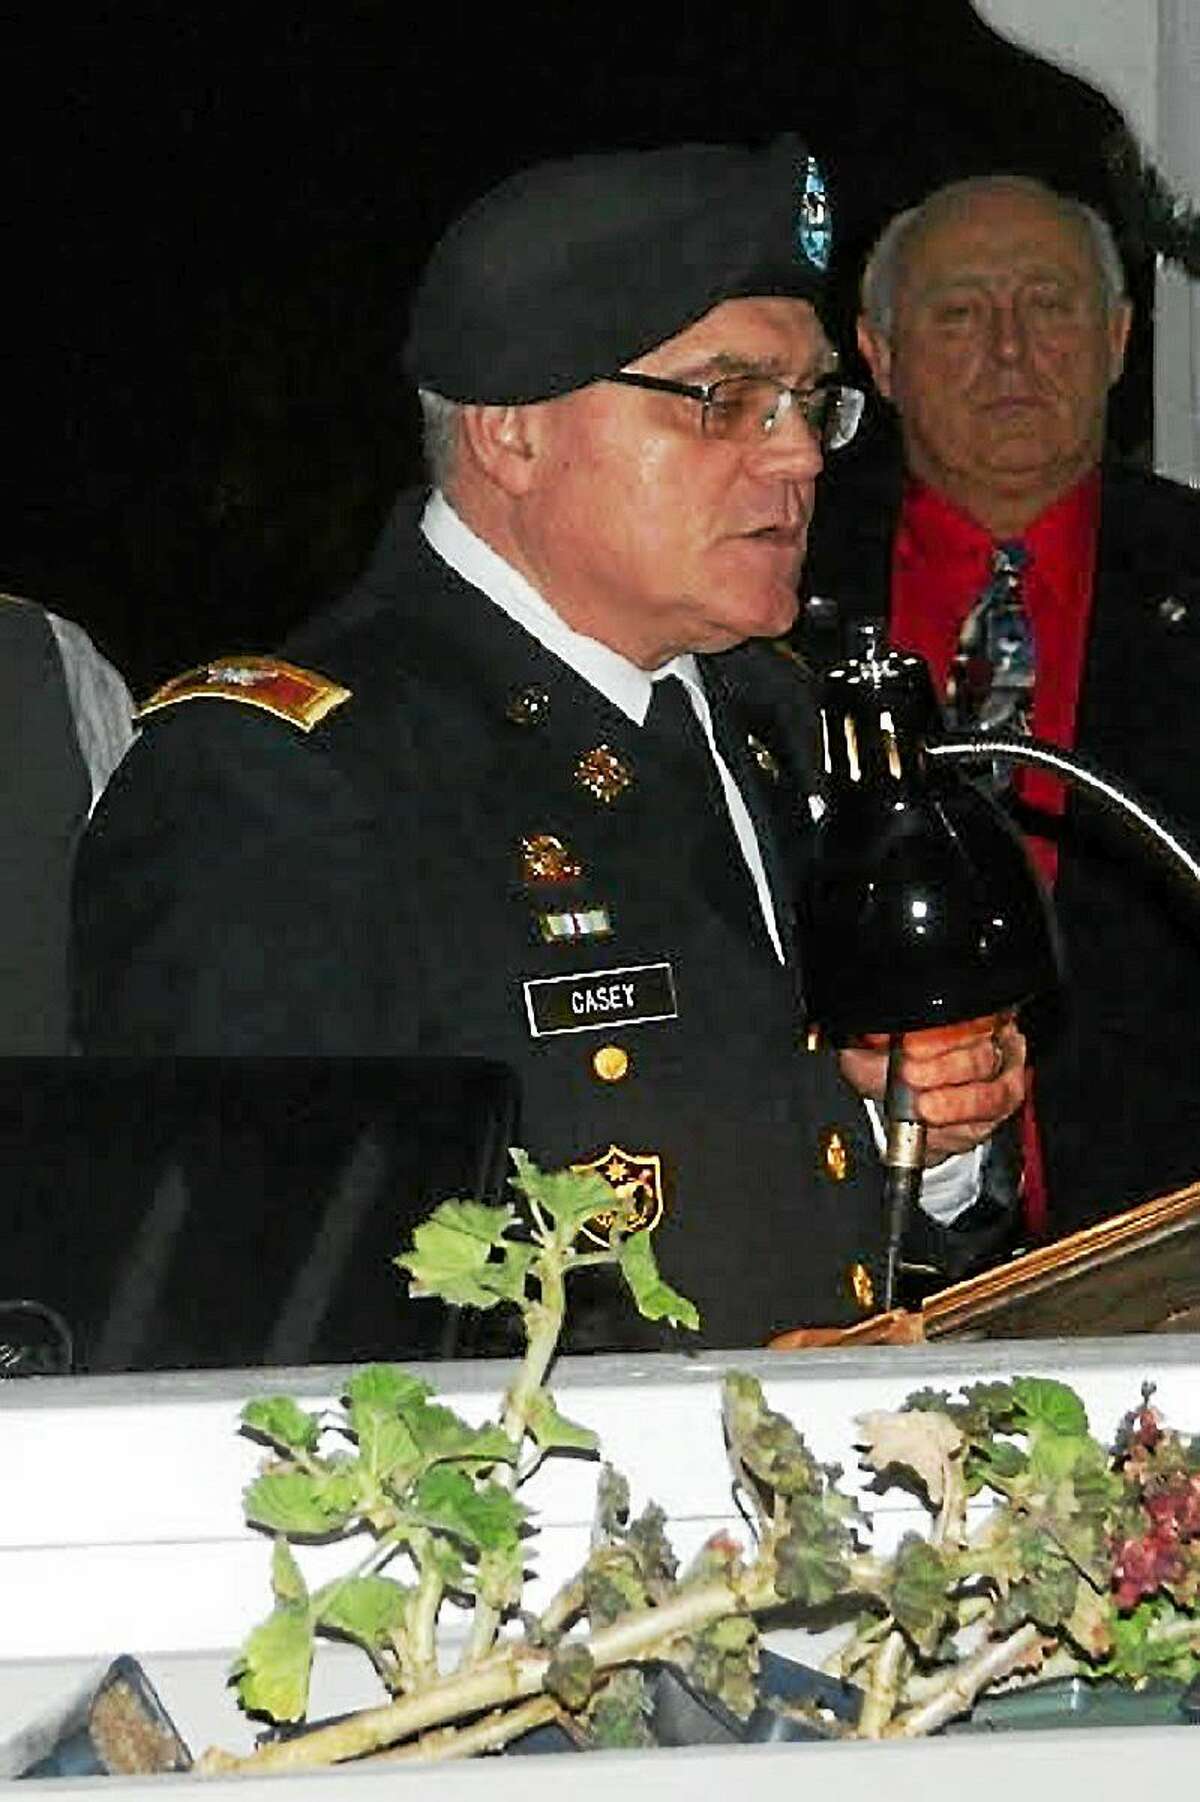 Col. Michael E. Casey of the Connecticut National Guard speaks at Tuesday night’s ceremony.